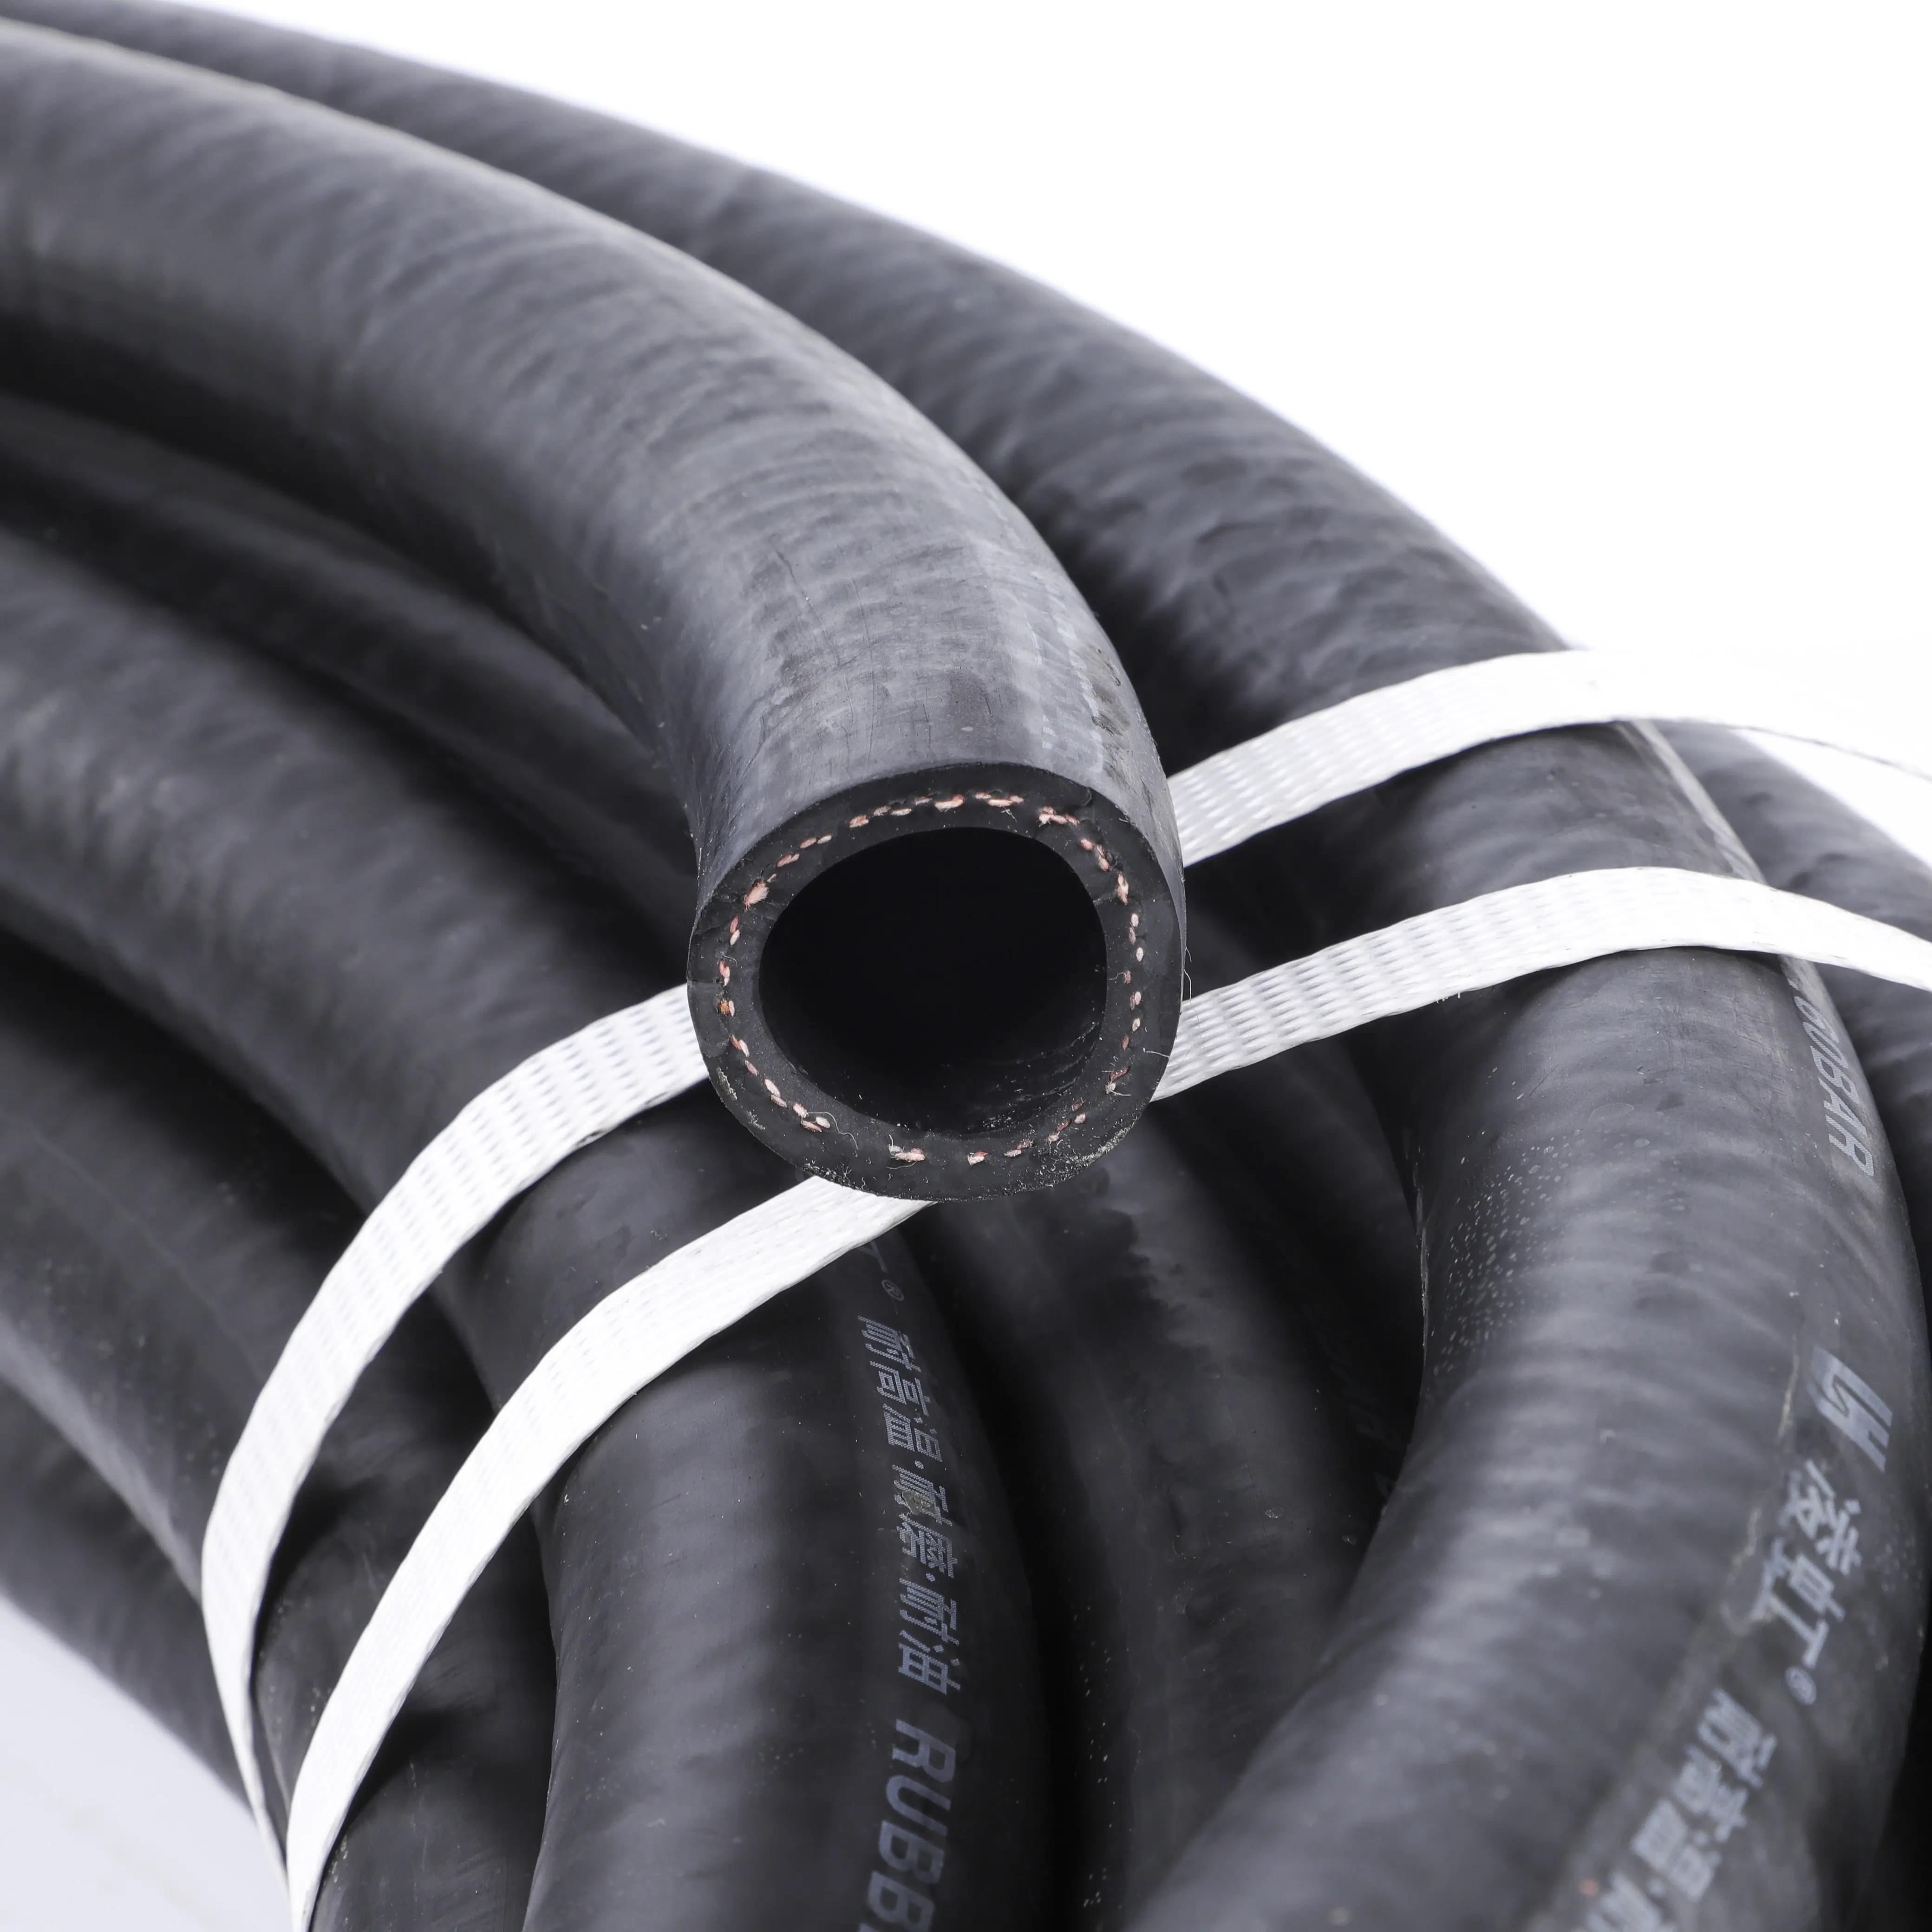 Reinforced Dredging Pipe and Floating Body for Dredging Suction High Quality Rubber Hose Product